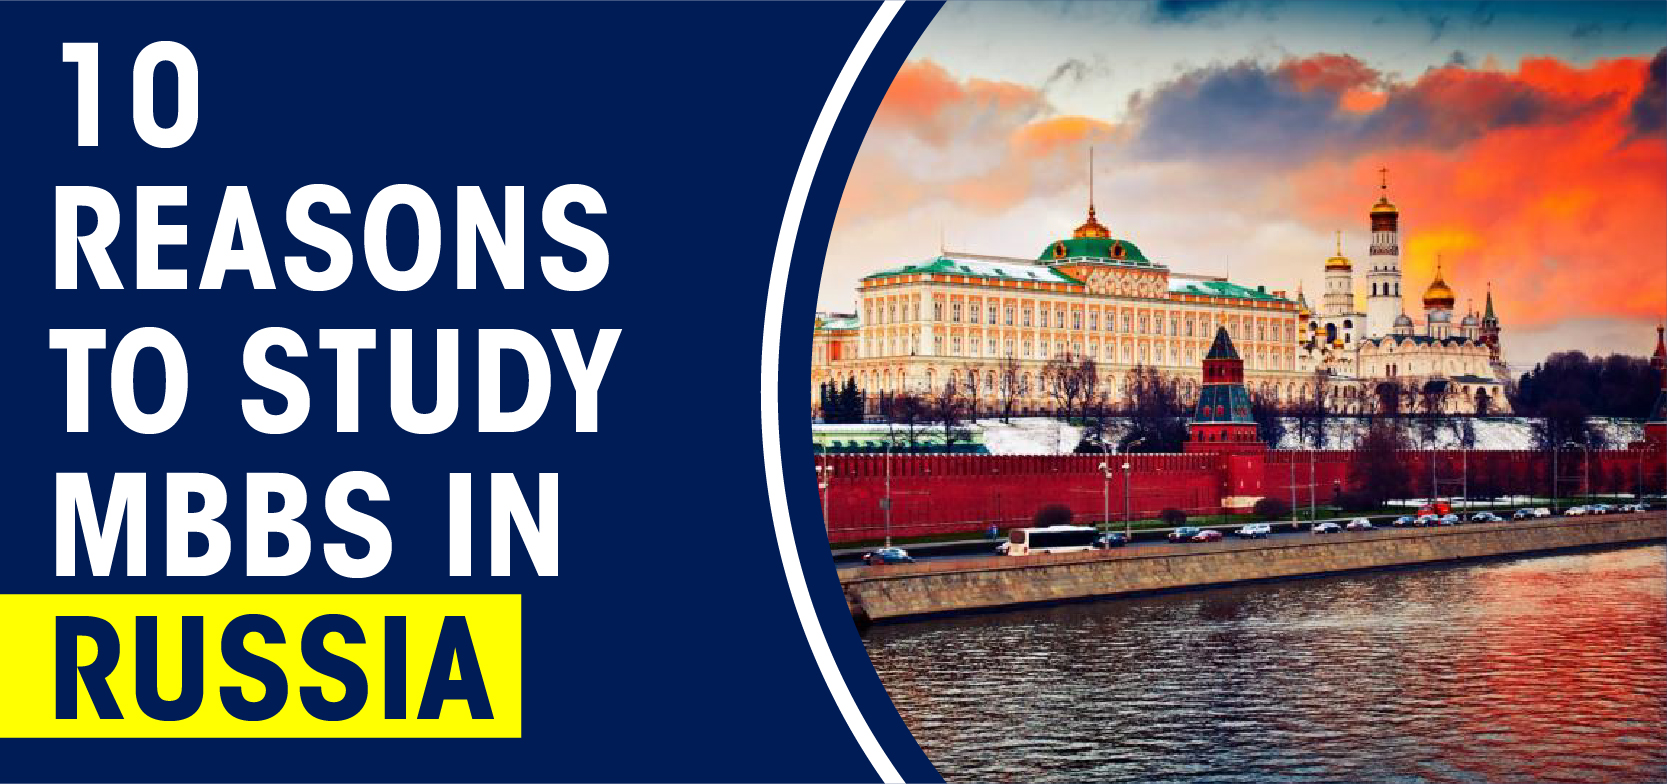 10 Reasons To Study MBBS In Russia